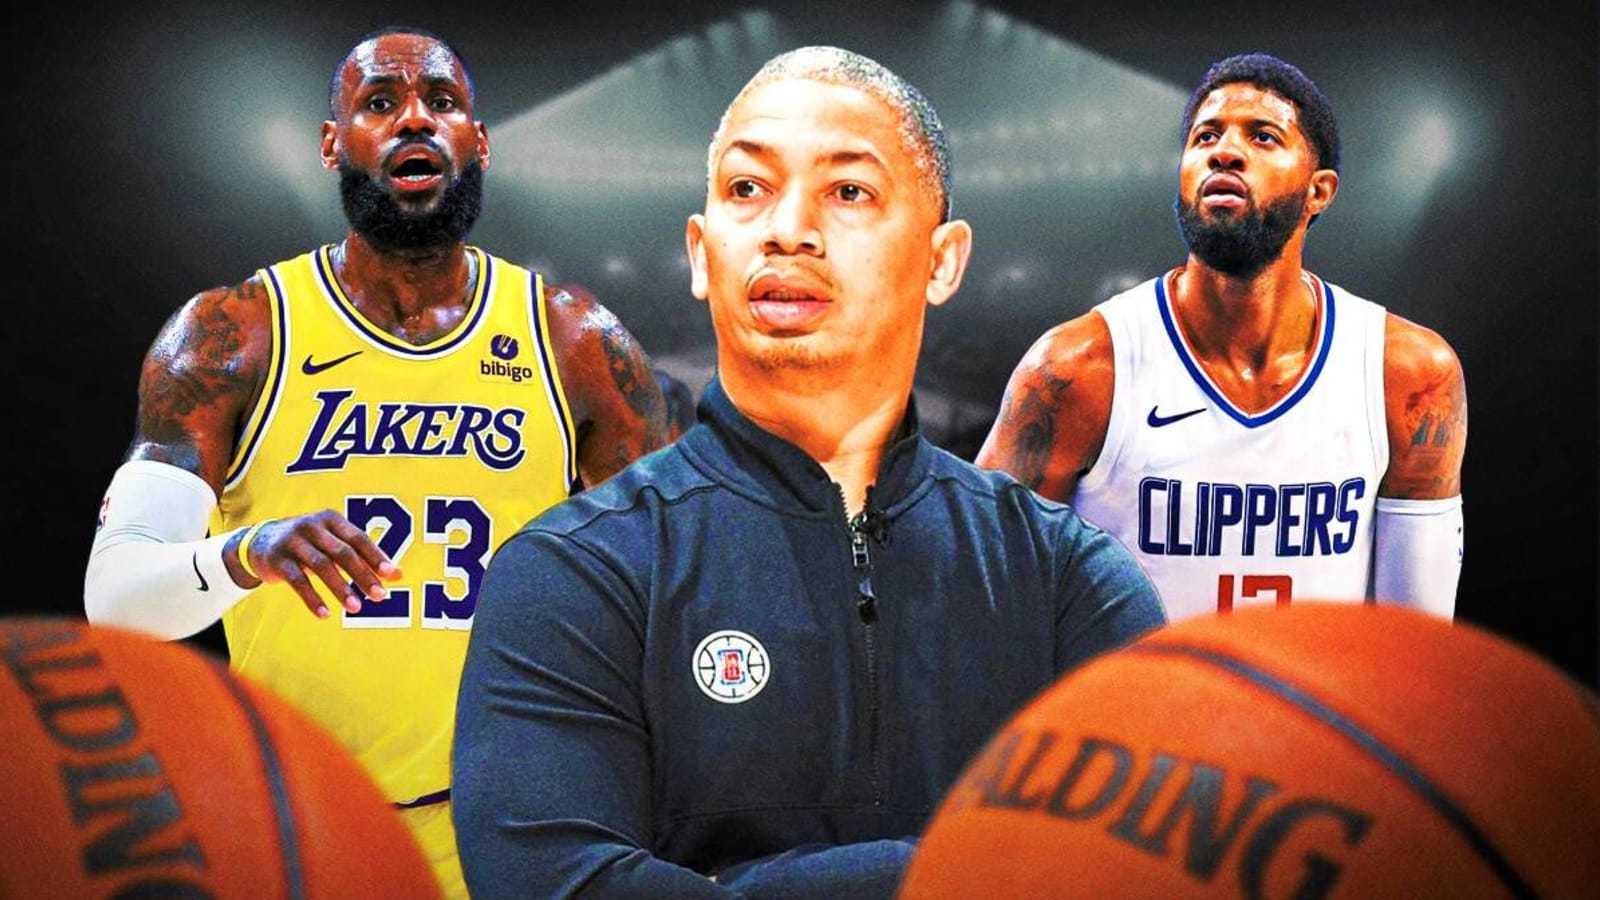 The chances Tyronn Lue leaves Clippers for Lakers, per Woj